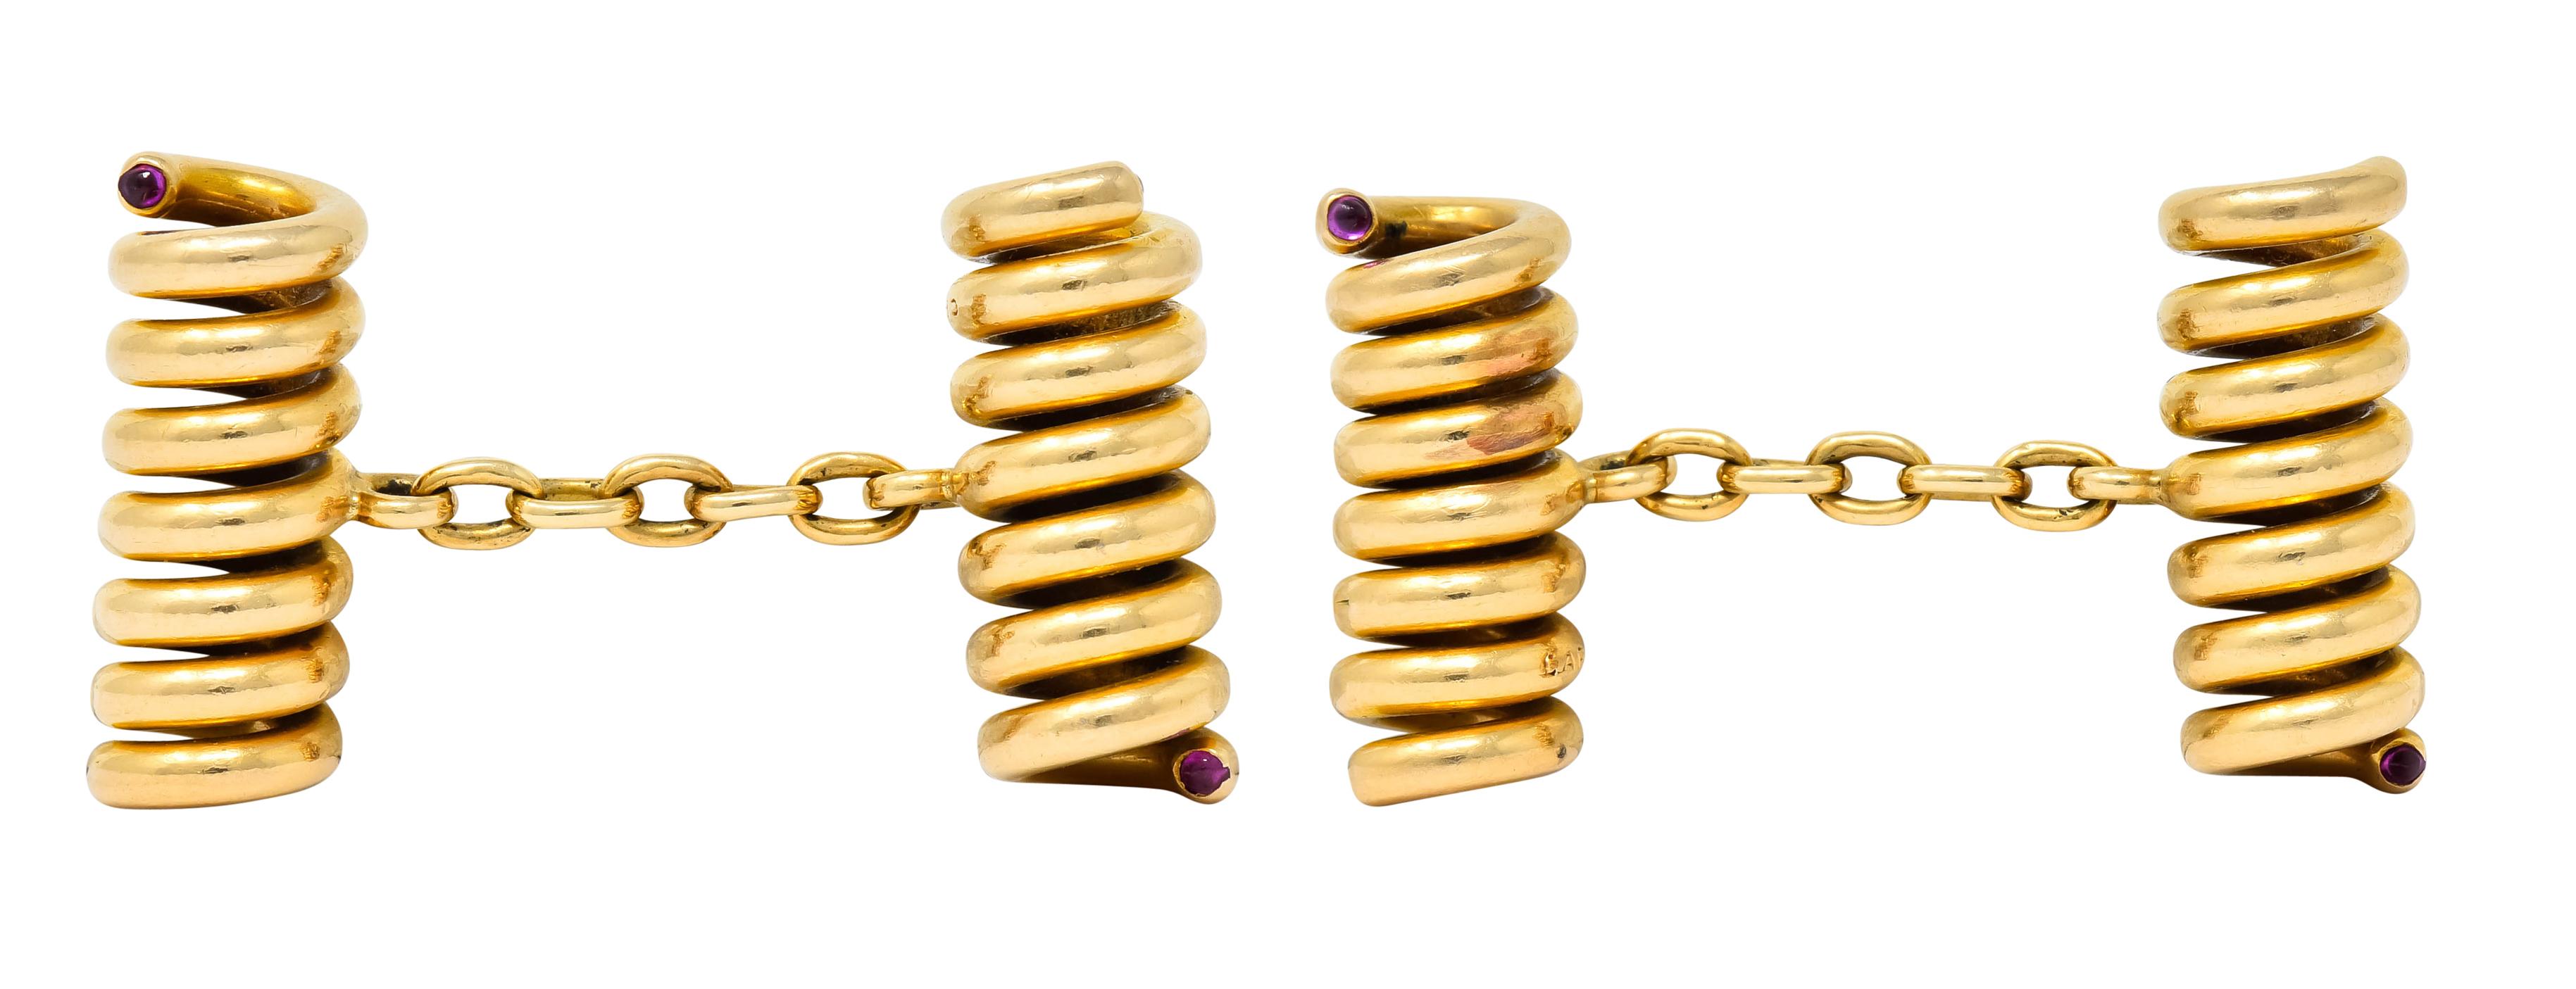 Link style cufflinks designed as spiraled corkscrews terminating as small ruby cabochon accents

Brightly polished

Fully signed Cartier

Tested as 18 karat gold

Circa: 1940s

Length: 1 1/4 inches

Corkscrew measures: 1/4 x 3/4 inch

Total weight: